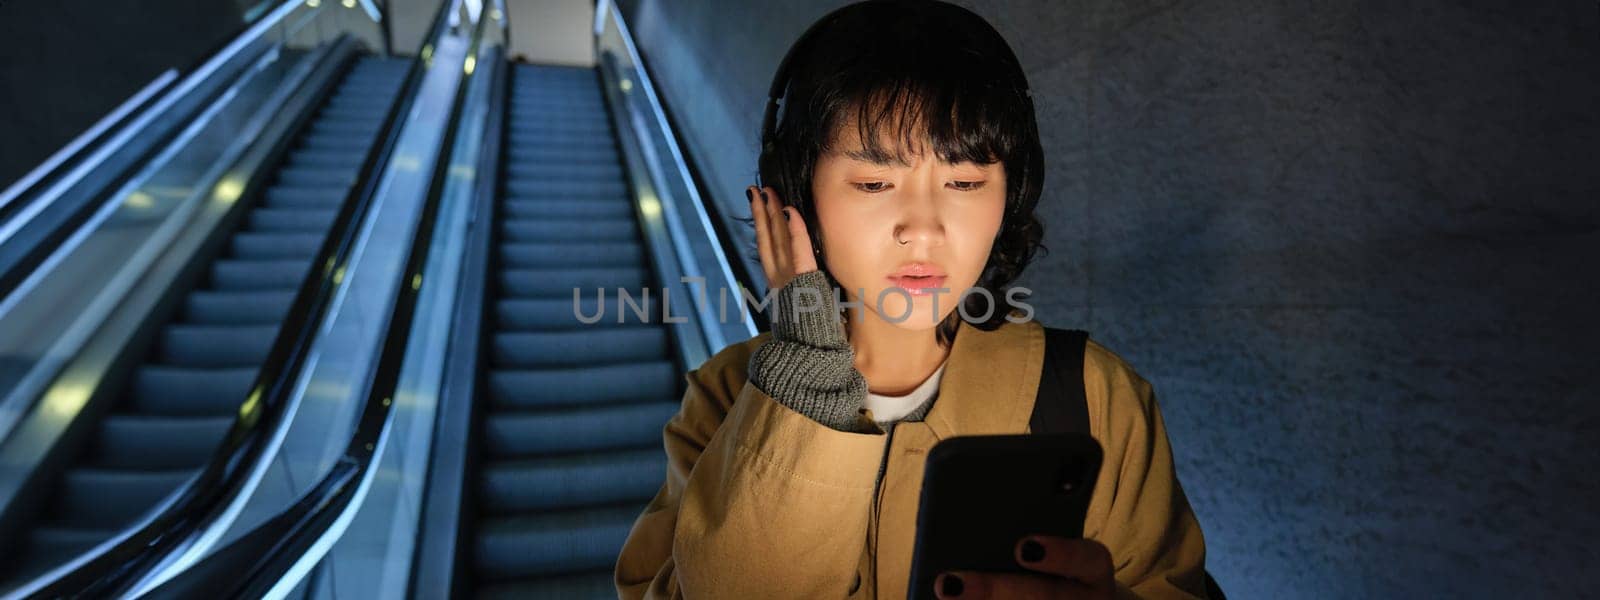 Woman in headphones, listens music, looks concerned at her phone screen, goes down escalator in city by Benzoix